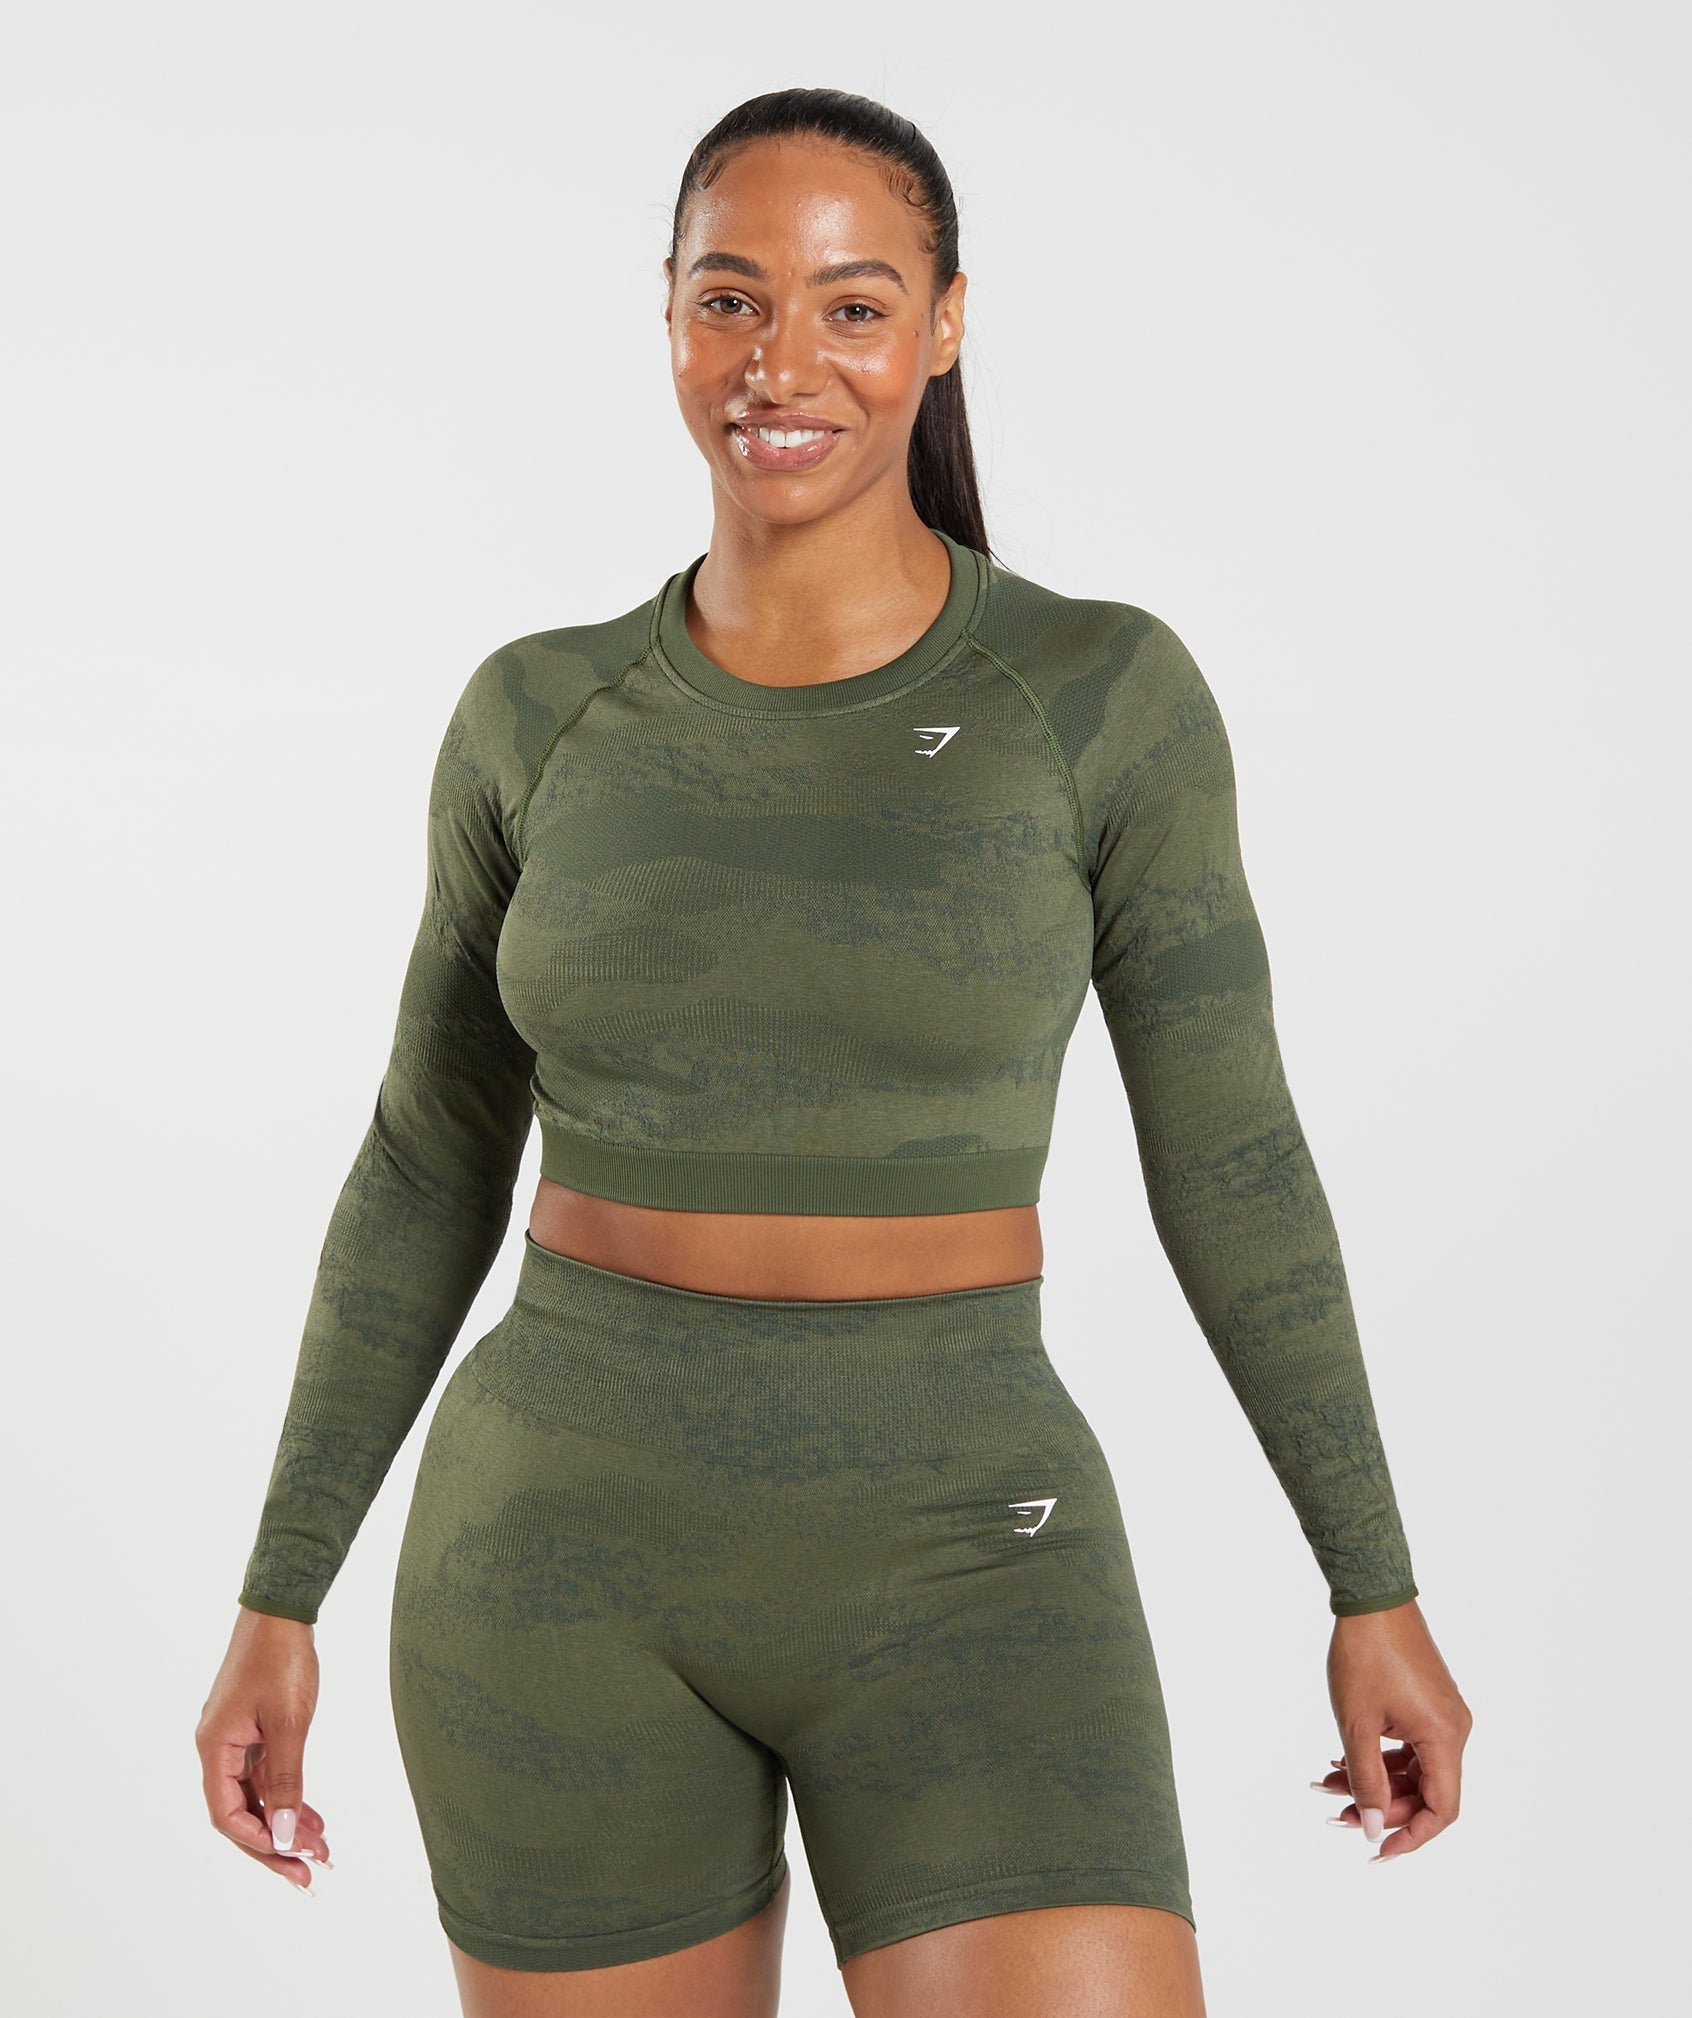 Adapt Camo Seamless Lace Up Back Top in Moss Olive/Core Olive